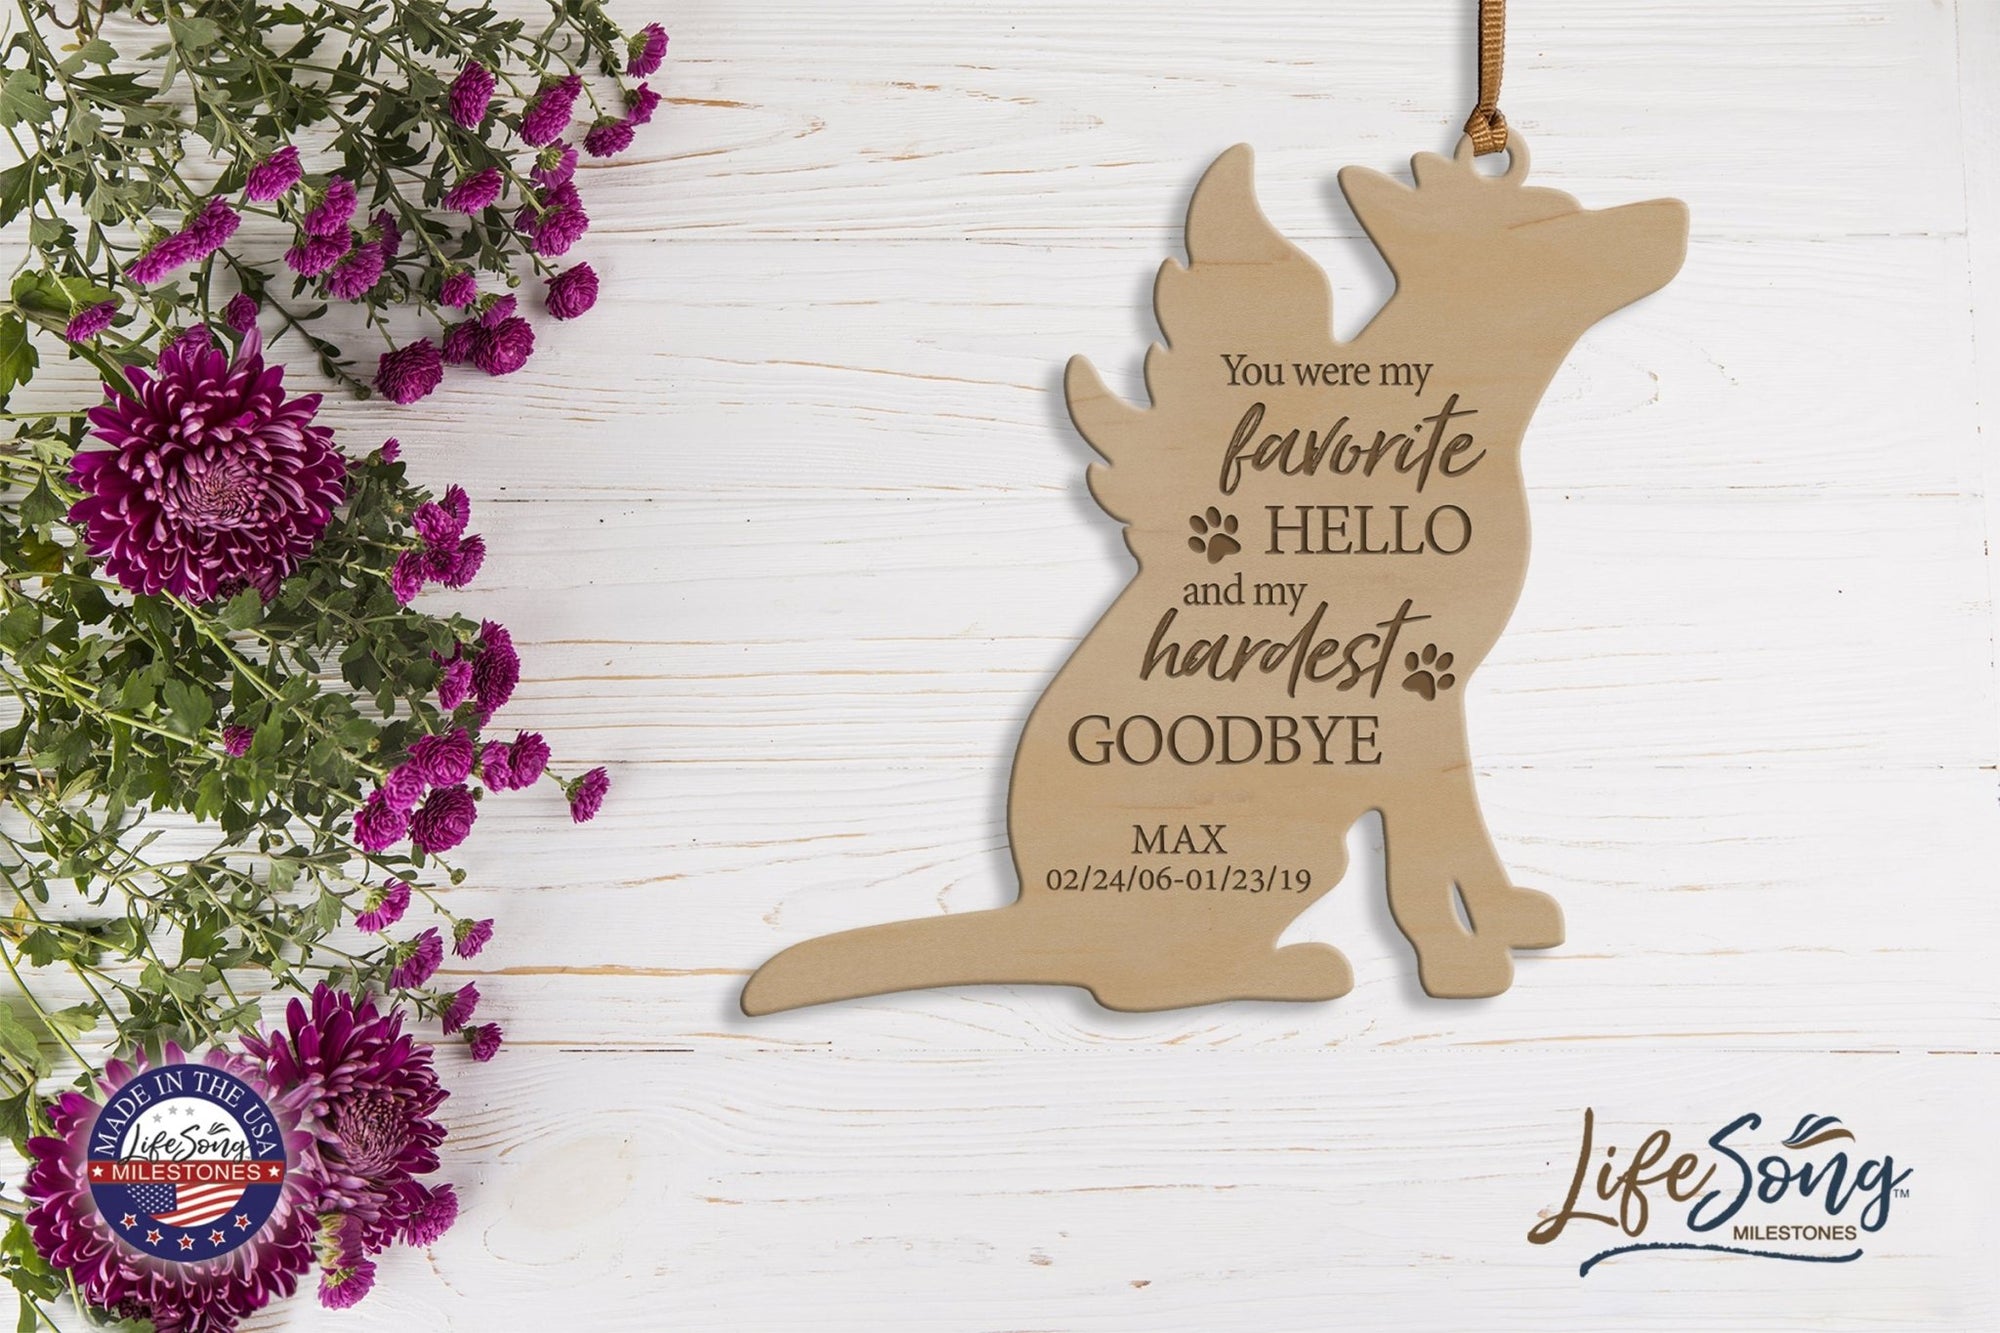 Personalized Engraved Memorial Dog Ornament 4.9375” x 5.375” x 0.125” - You were my favorite hello (PAWS) - LifeSong Milestones